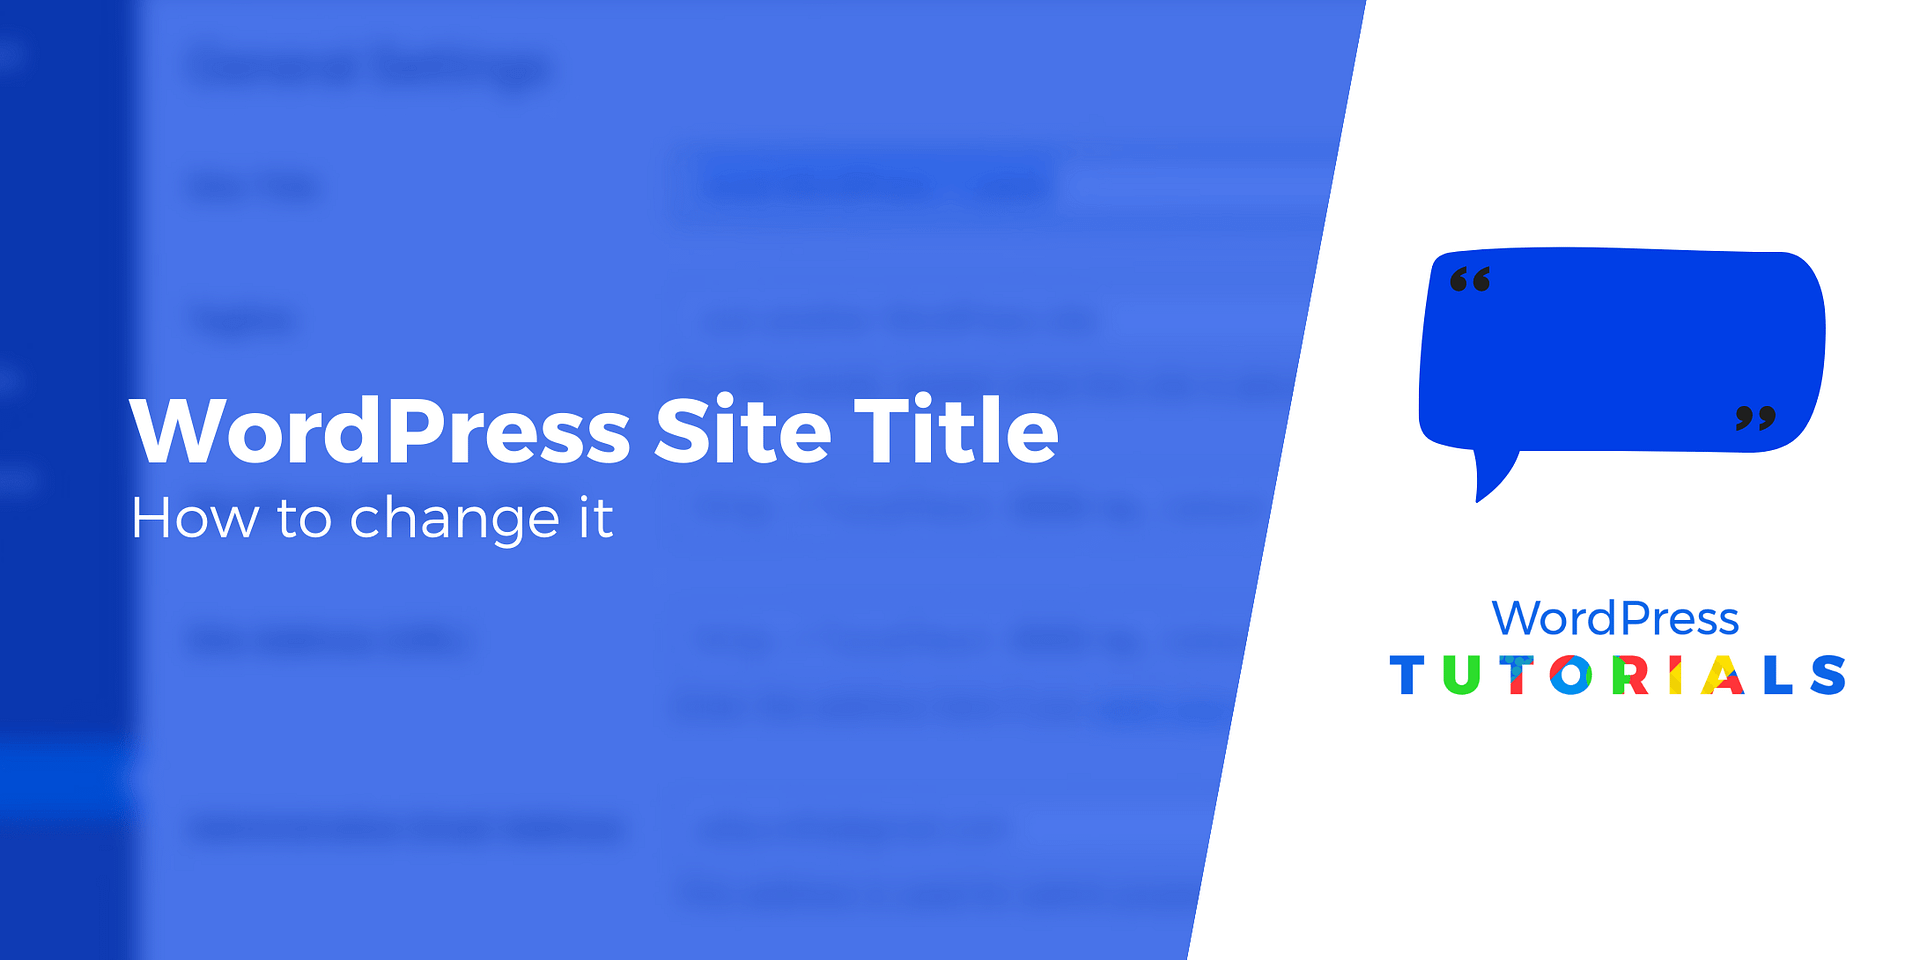 Your Site Title